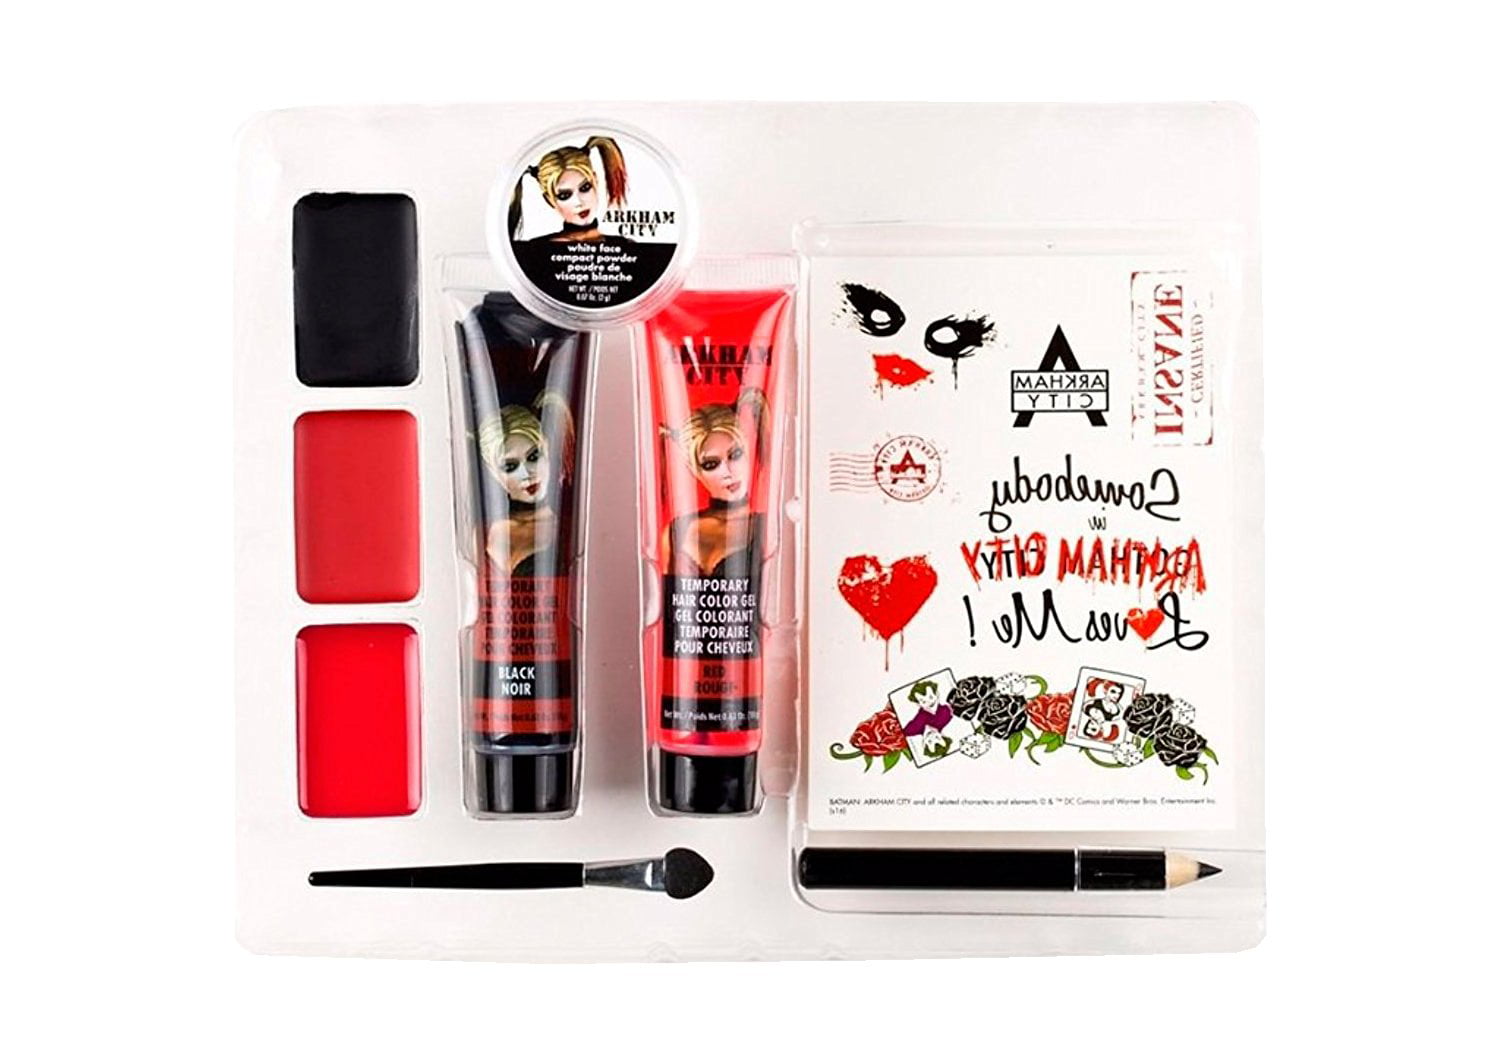 Get The Look - HARLEY QUINN CosPlay Makeup Kit - BRAND NEW - SHIPS FREE!